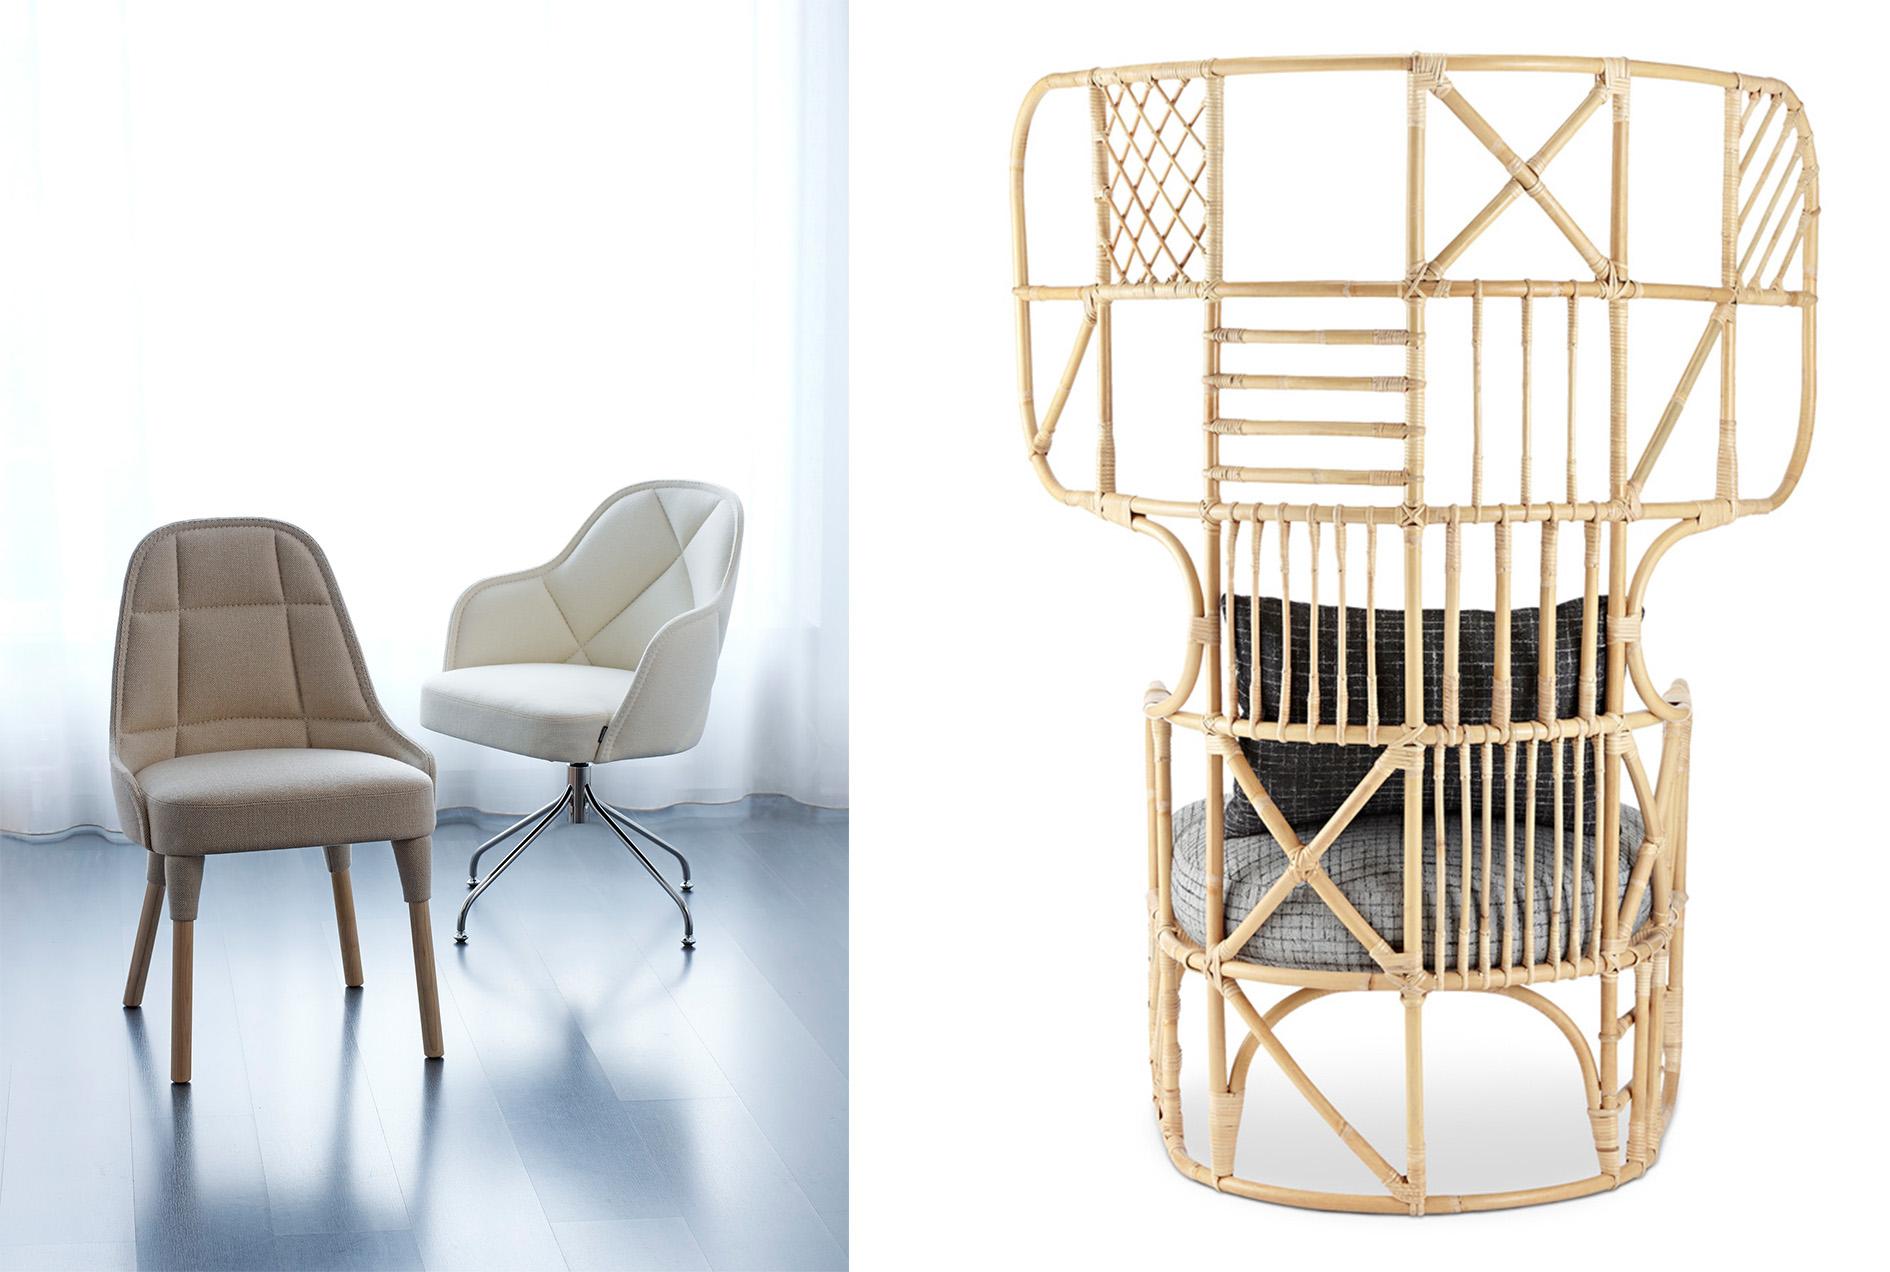 Left: Two different upholstered chairs. Right: A tall wicker chair.